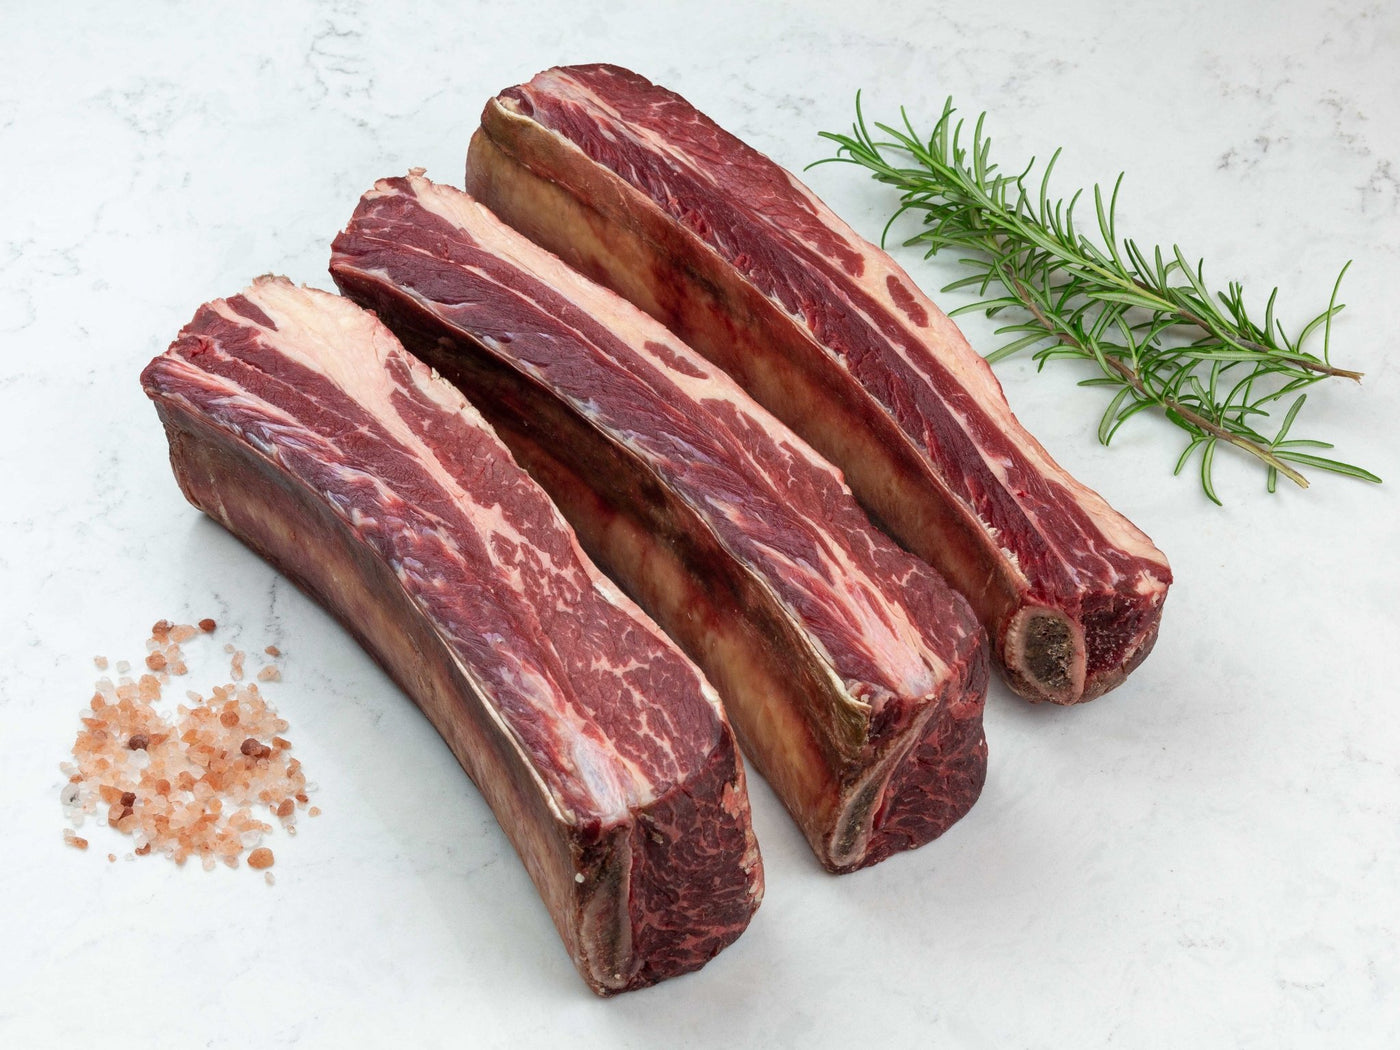 Grass Fed, Dry-Aged Short Ribs - Beef - Thomas Joseph Butchery - Ethical Dry-Aged Meat The Best Steak UK Thomas Joseph Butchery